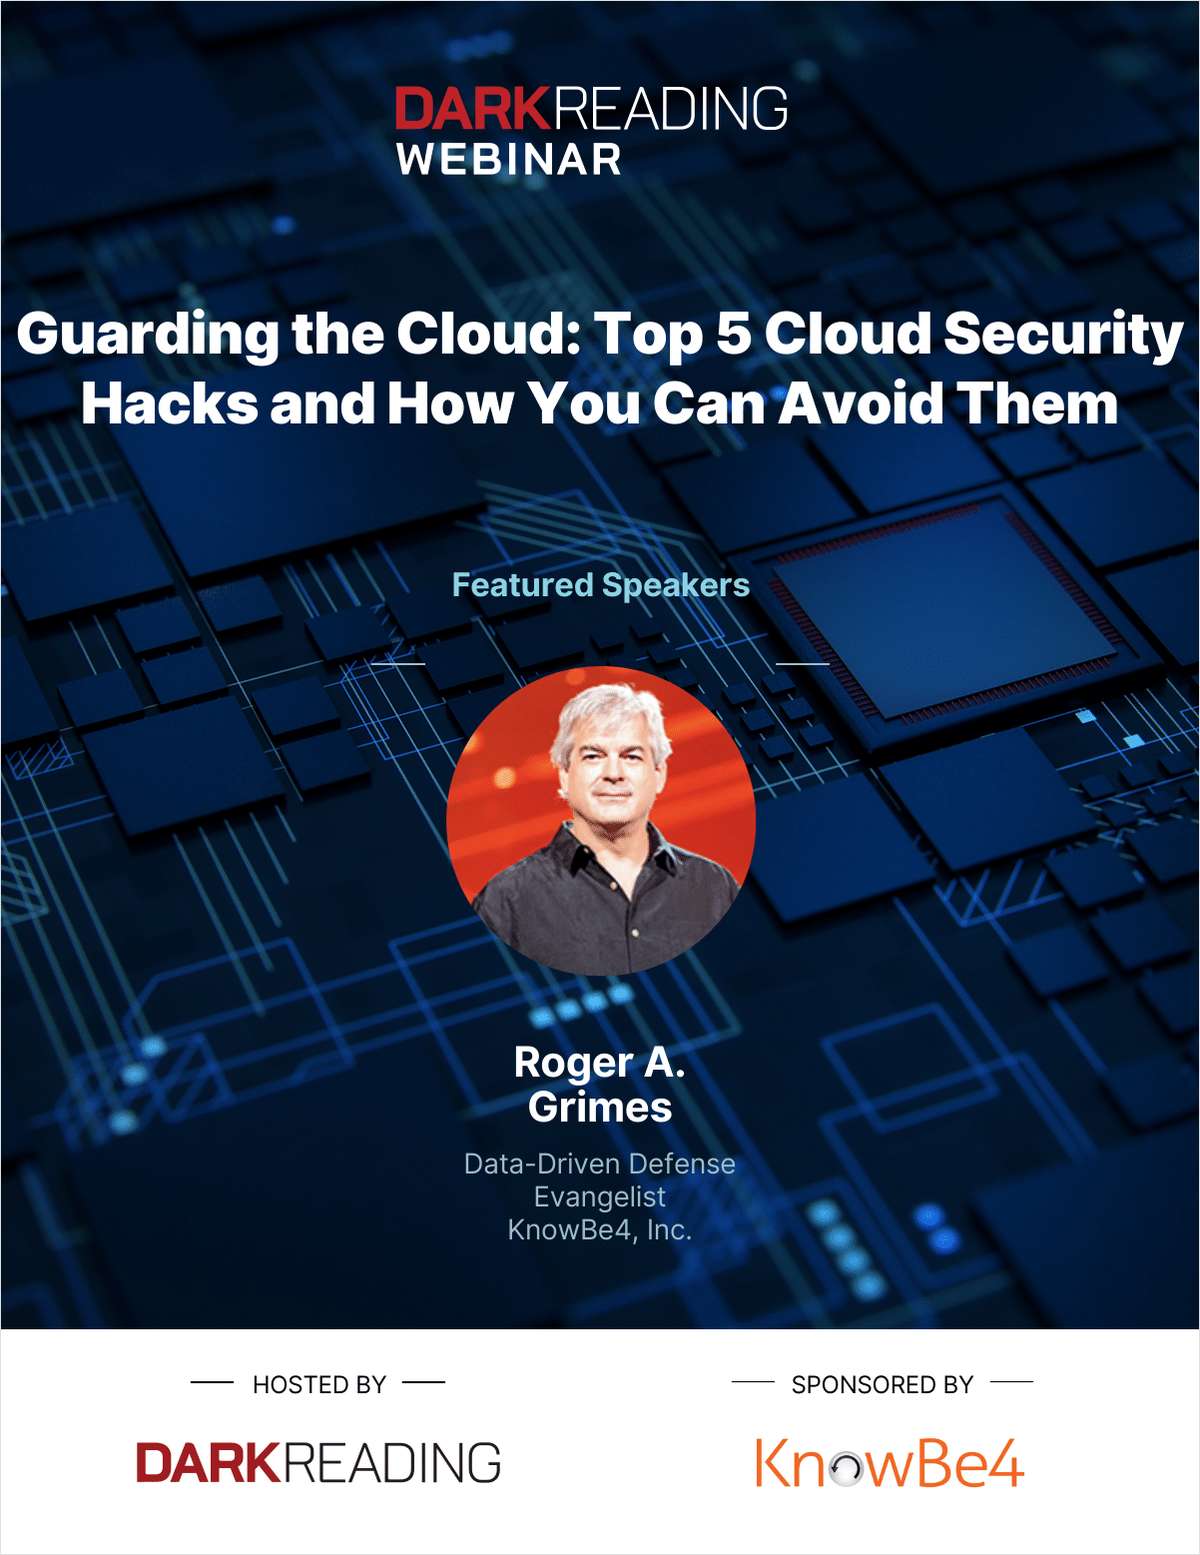 Guarding the Cloud: Top 5 Cloud Security Hacks and How You Can Avoid Them